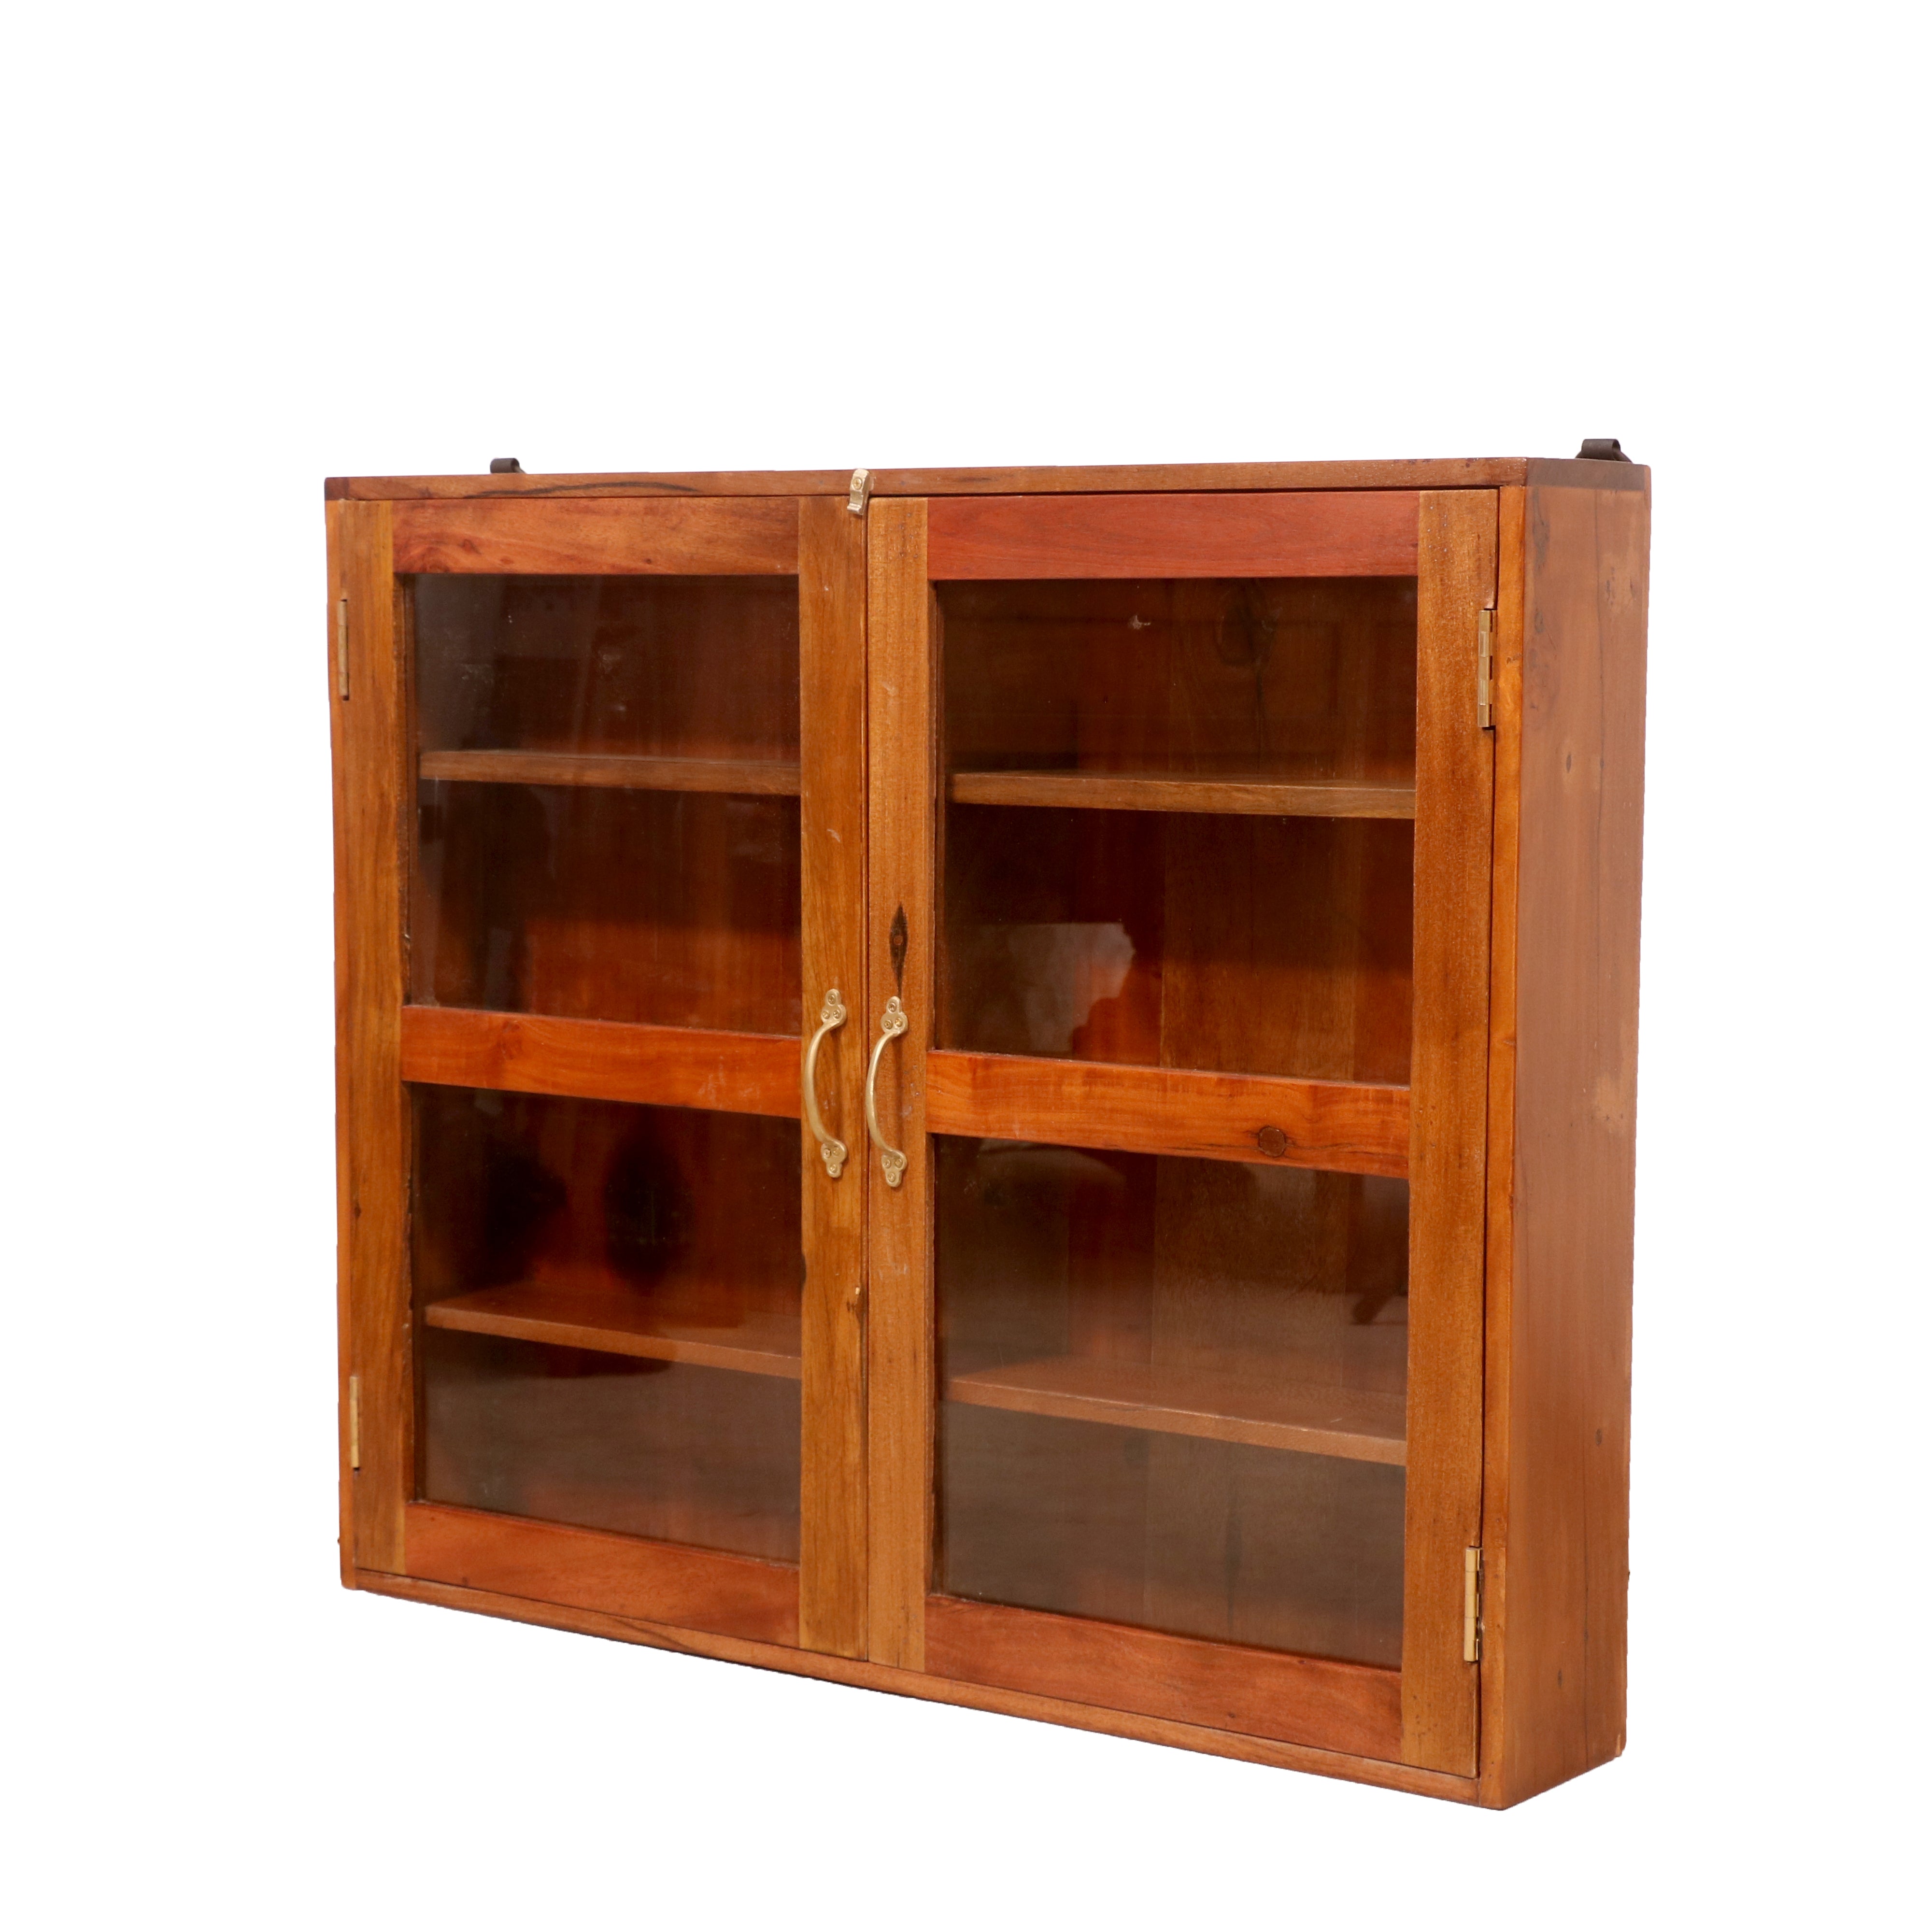 36 x 9 x 30 Inch Long Wide Hanging Cabinet Wall Cabinet